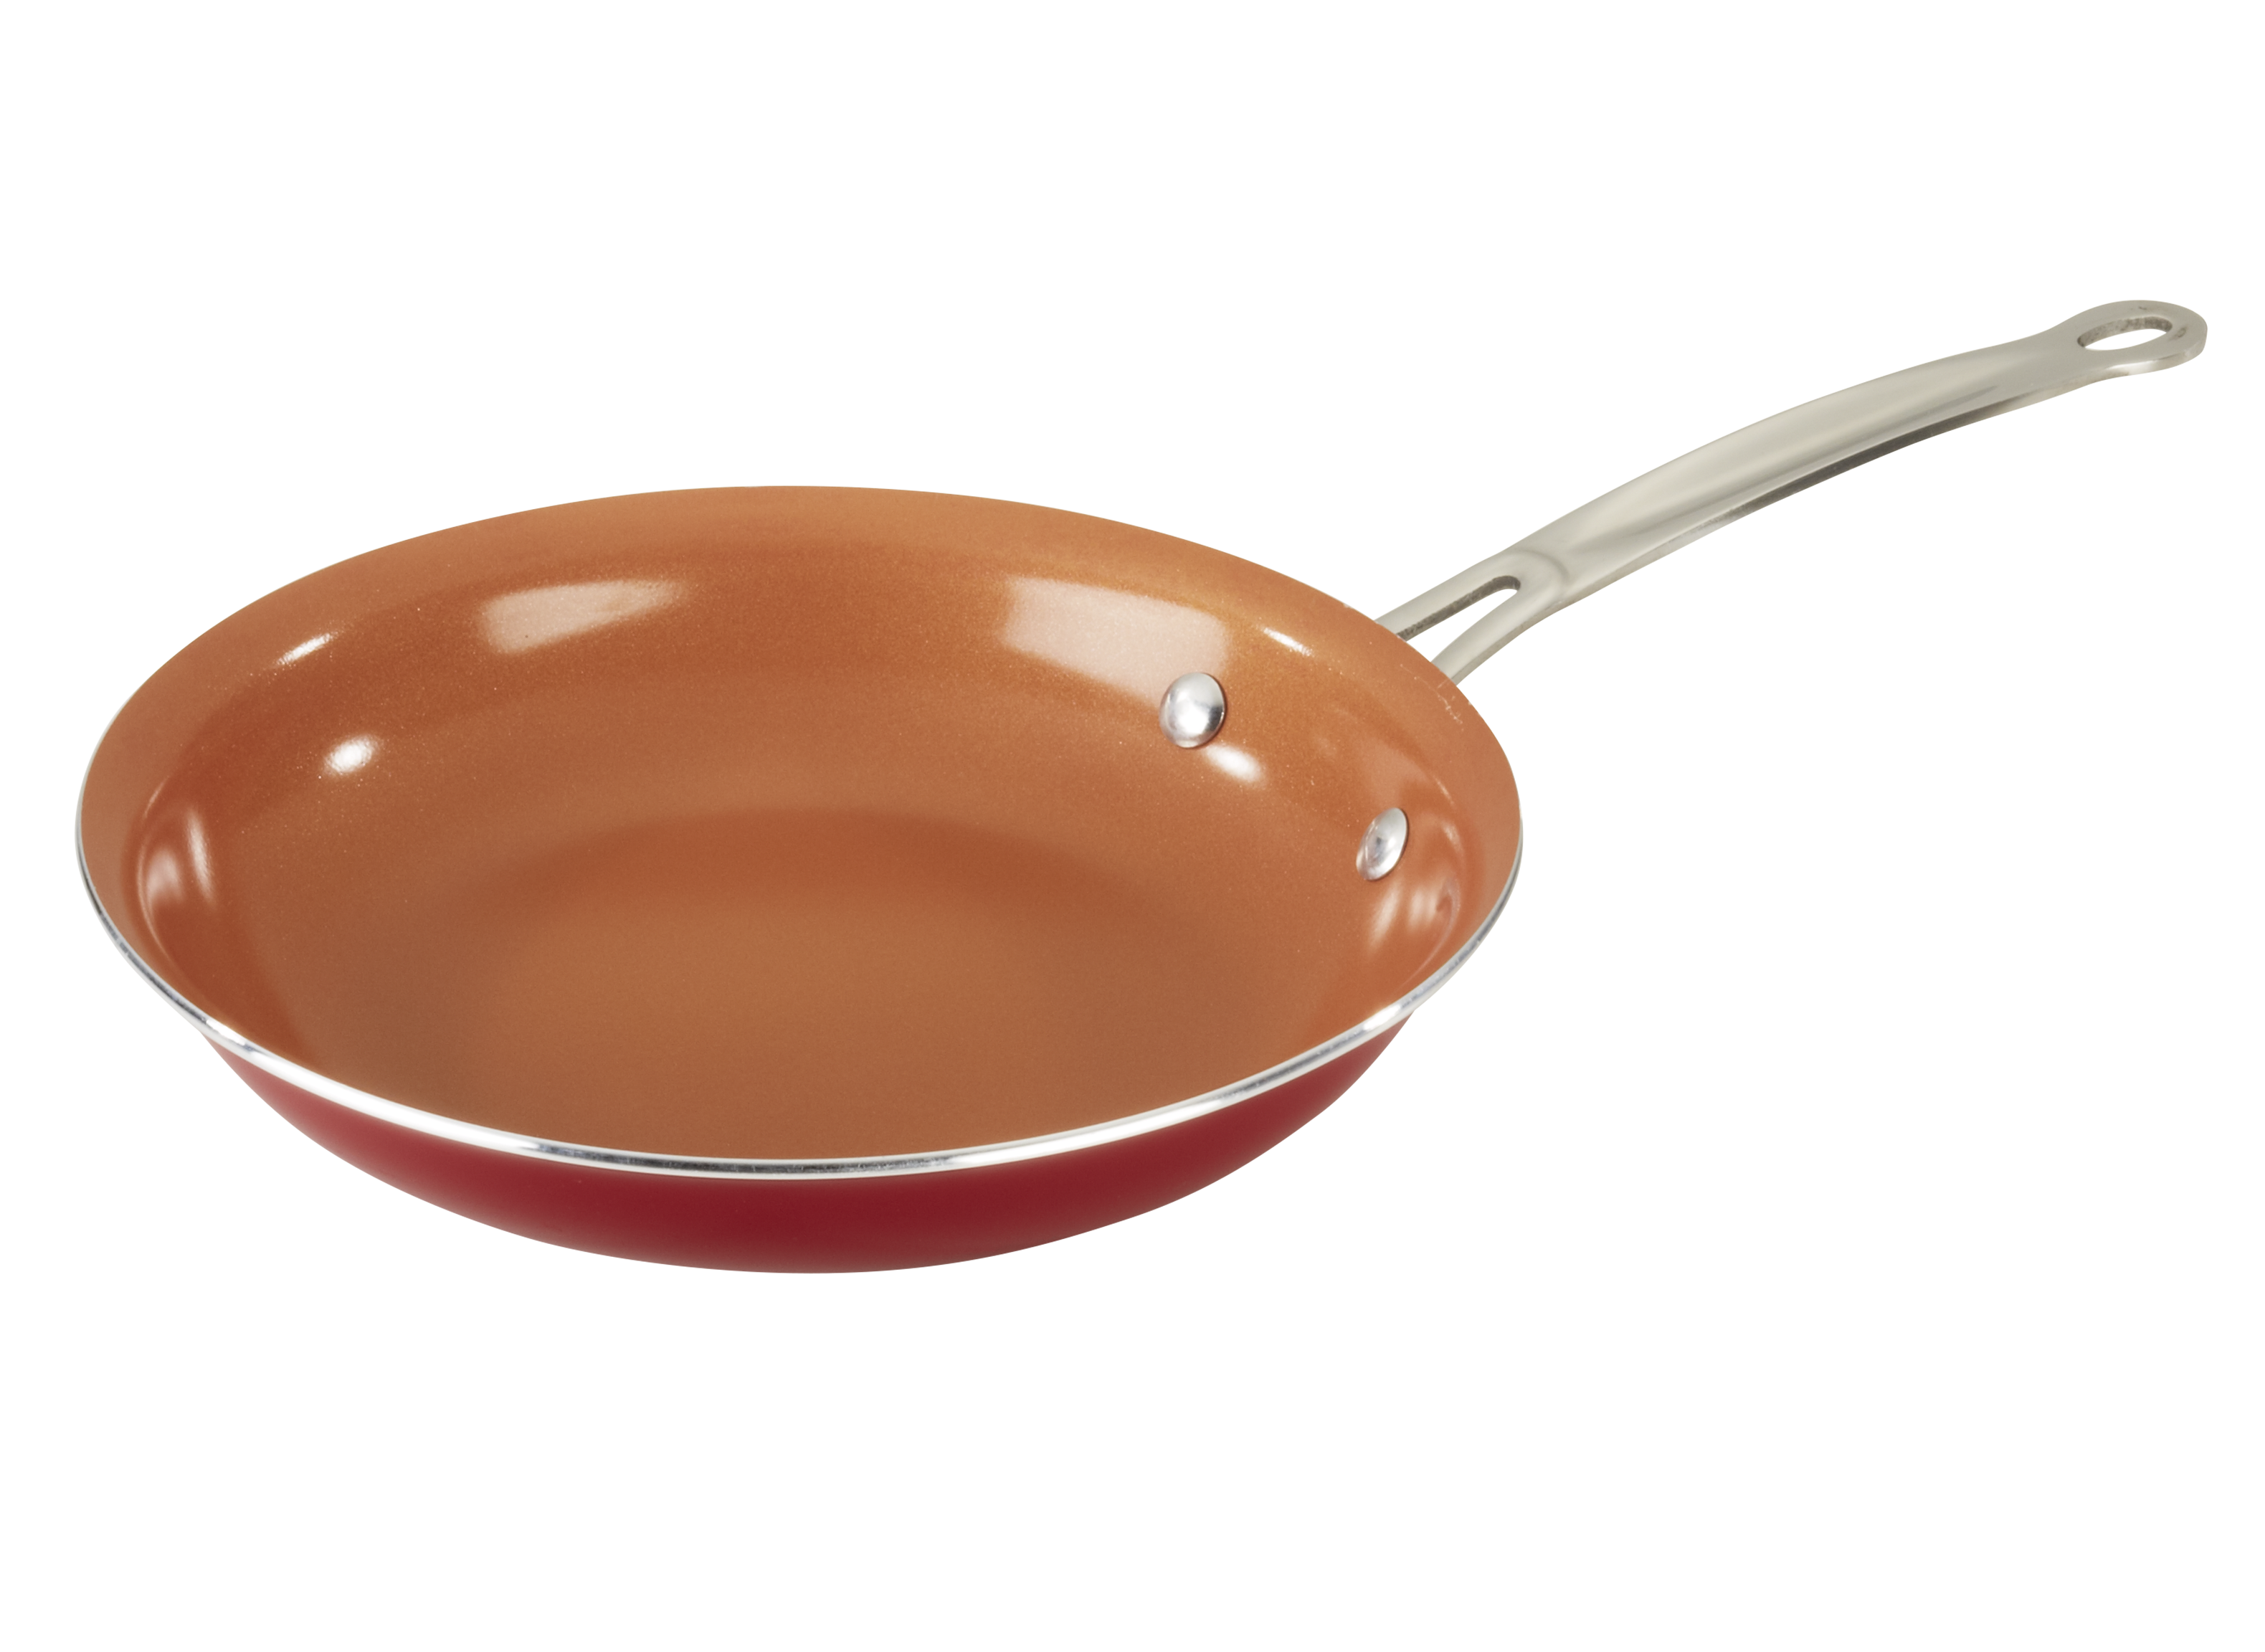 https://crdms.images.consumerreports.org/prod/products/cr/models/393385-fryingpans-redcopper-nonstick.png